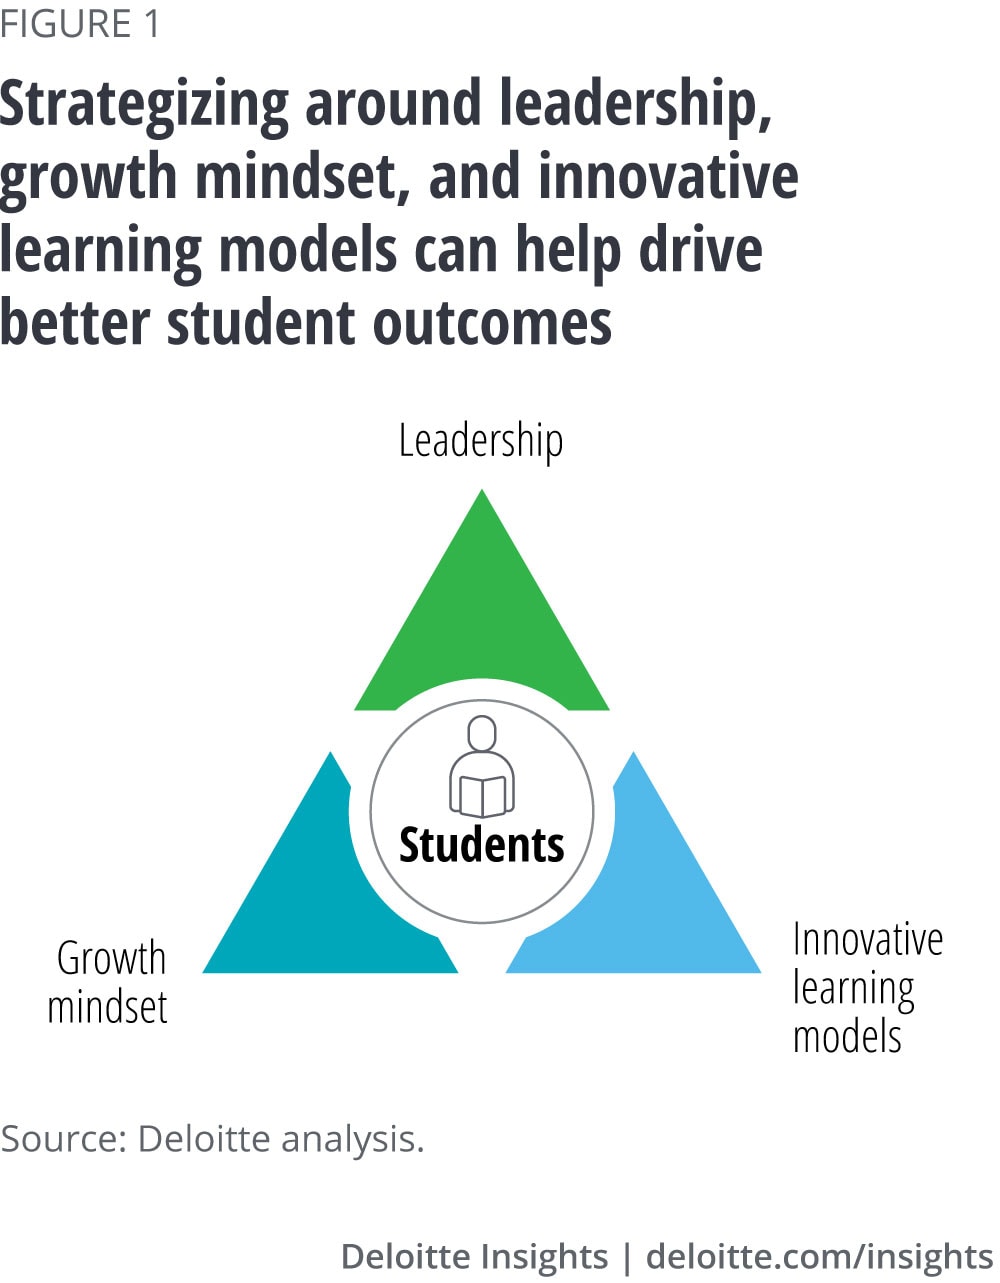 Strategizing around leadership, growth mindset, and innovative learning models can help drive better student outcomes